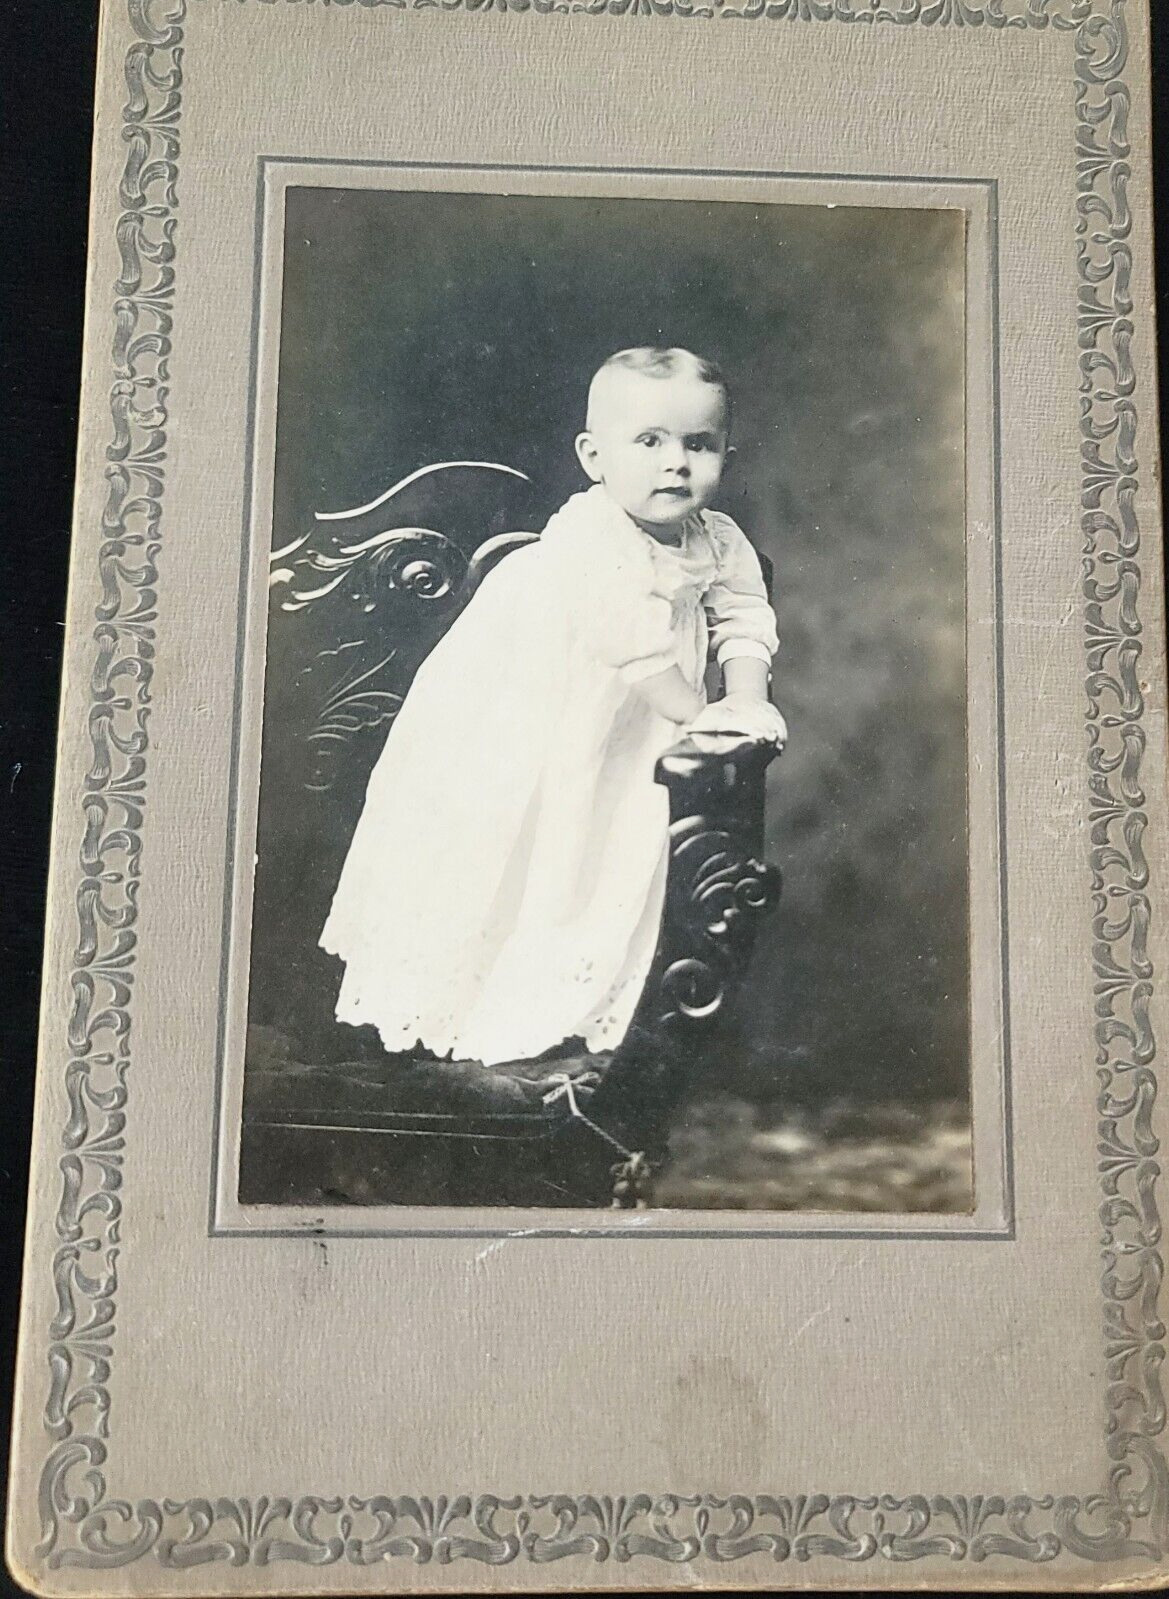 Young Child Standing on a Chair White Eyelet Lace Dress Vintage Cabinet Card